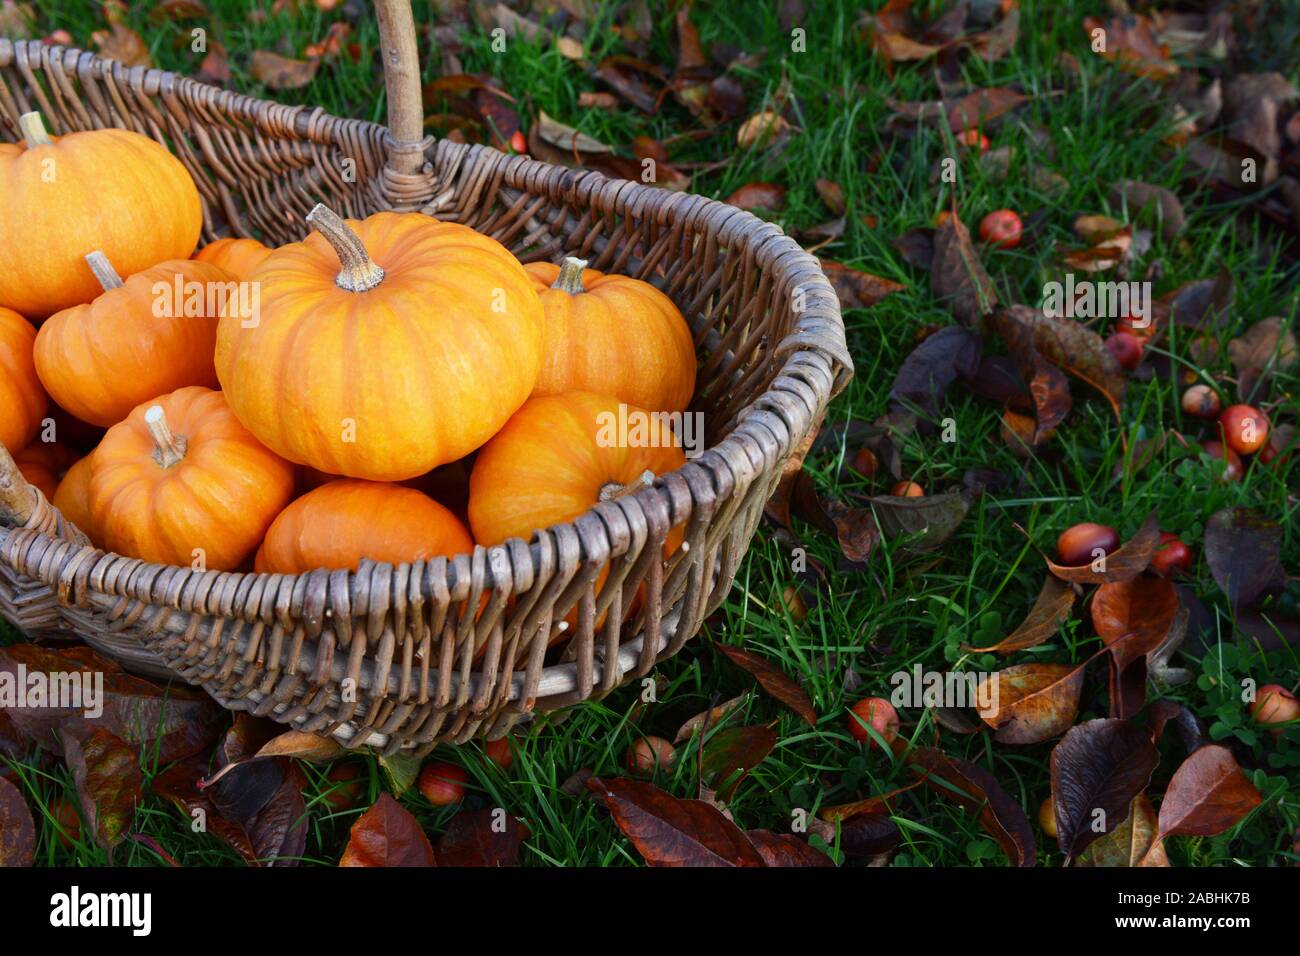 Rustic basket of small orange pumpkins for Thanksgiving decorations in a fall garden covered in leaves and crab apples Stock Photo